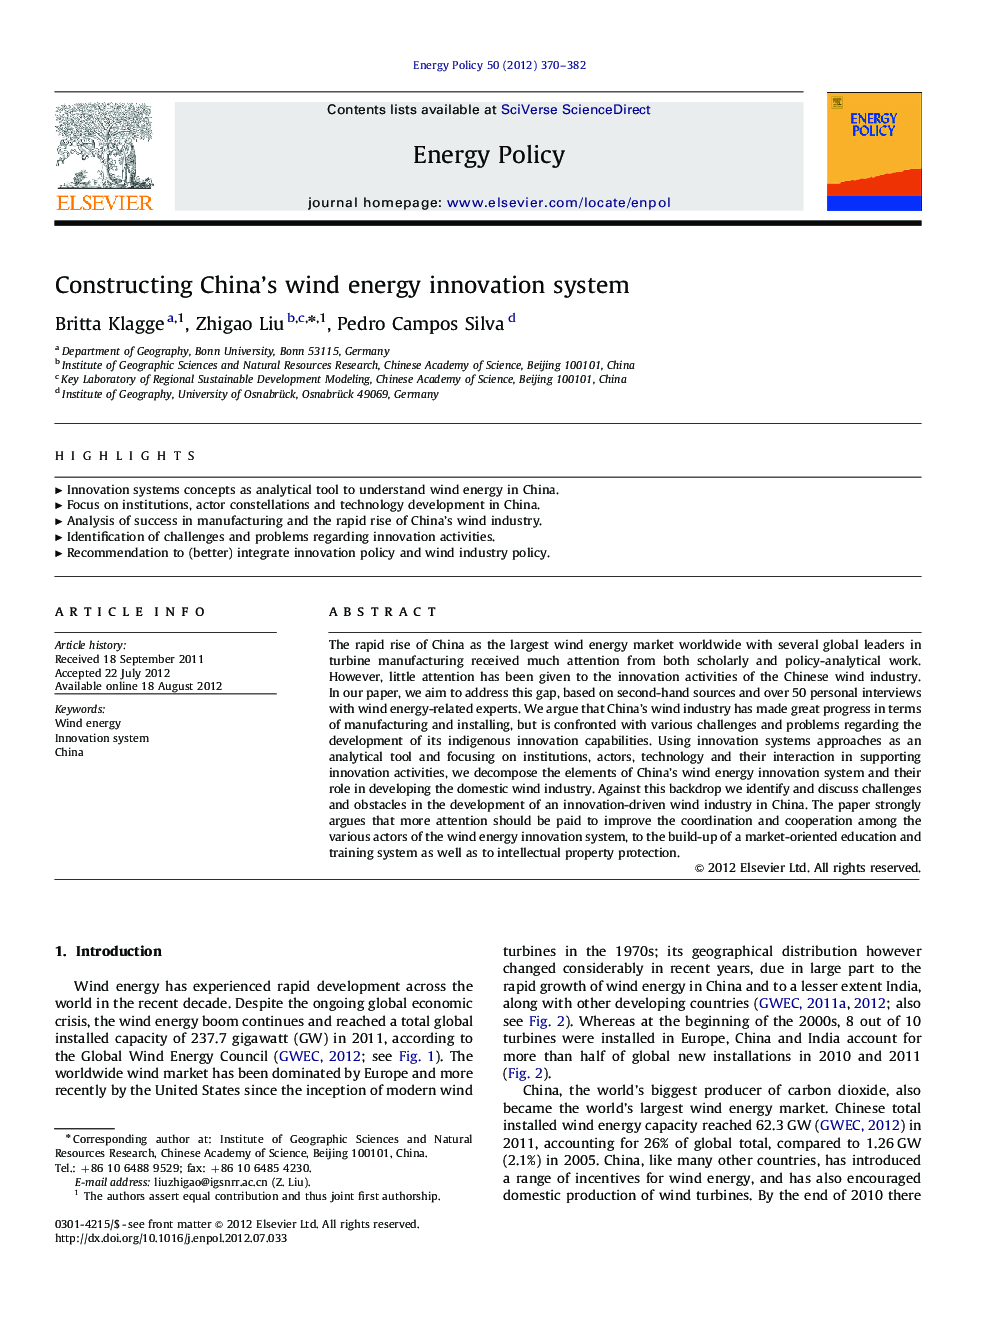 Constructing China's wind energy innovation system